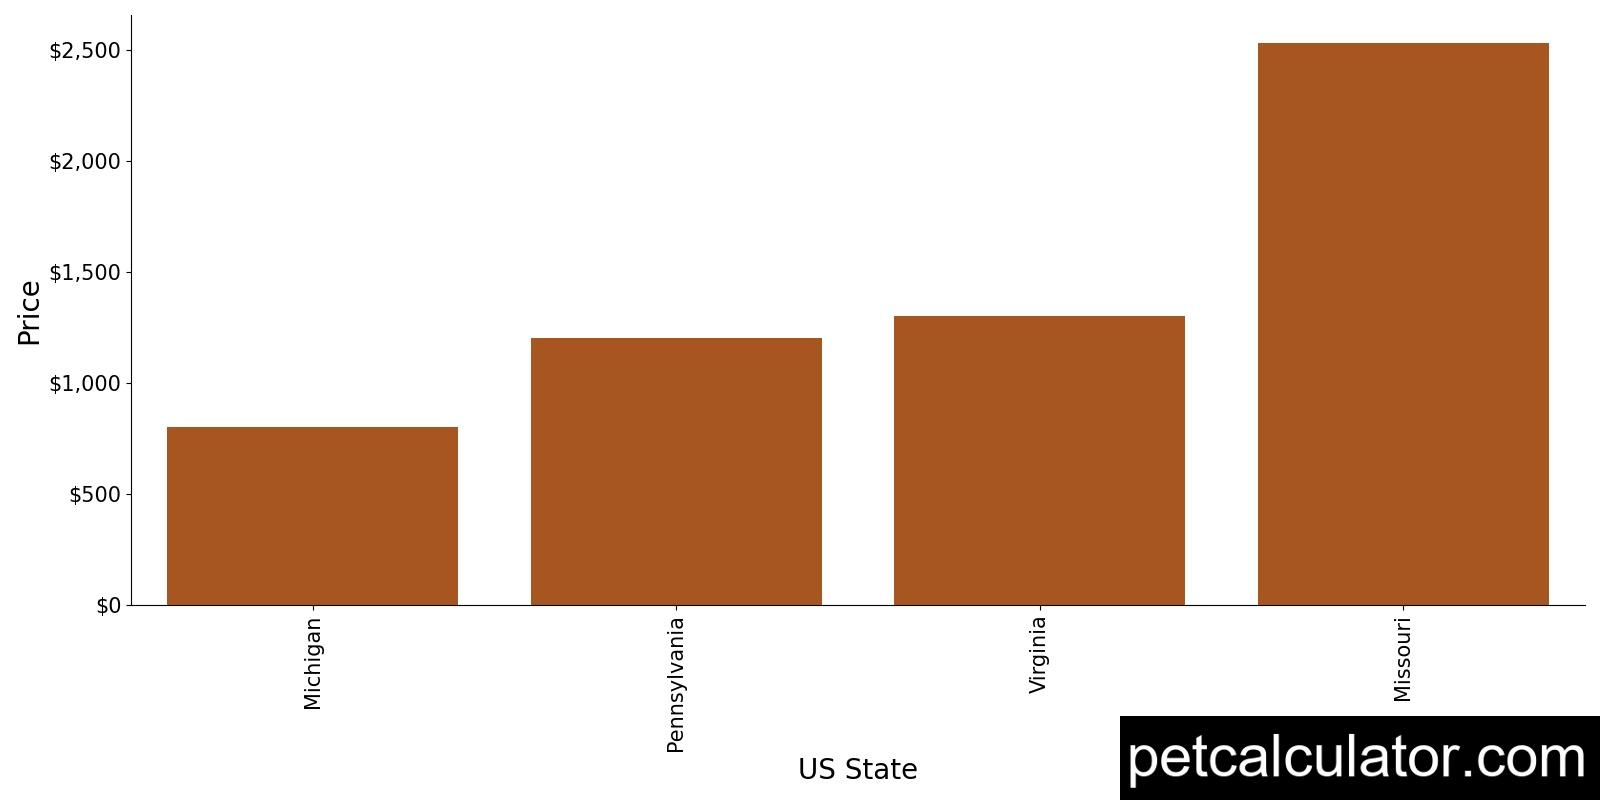 Price of Doodleman Pinscher by US State 